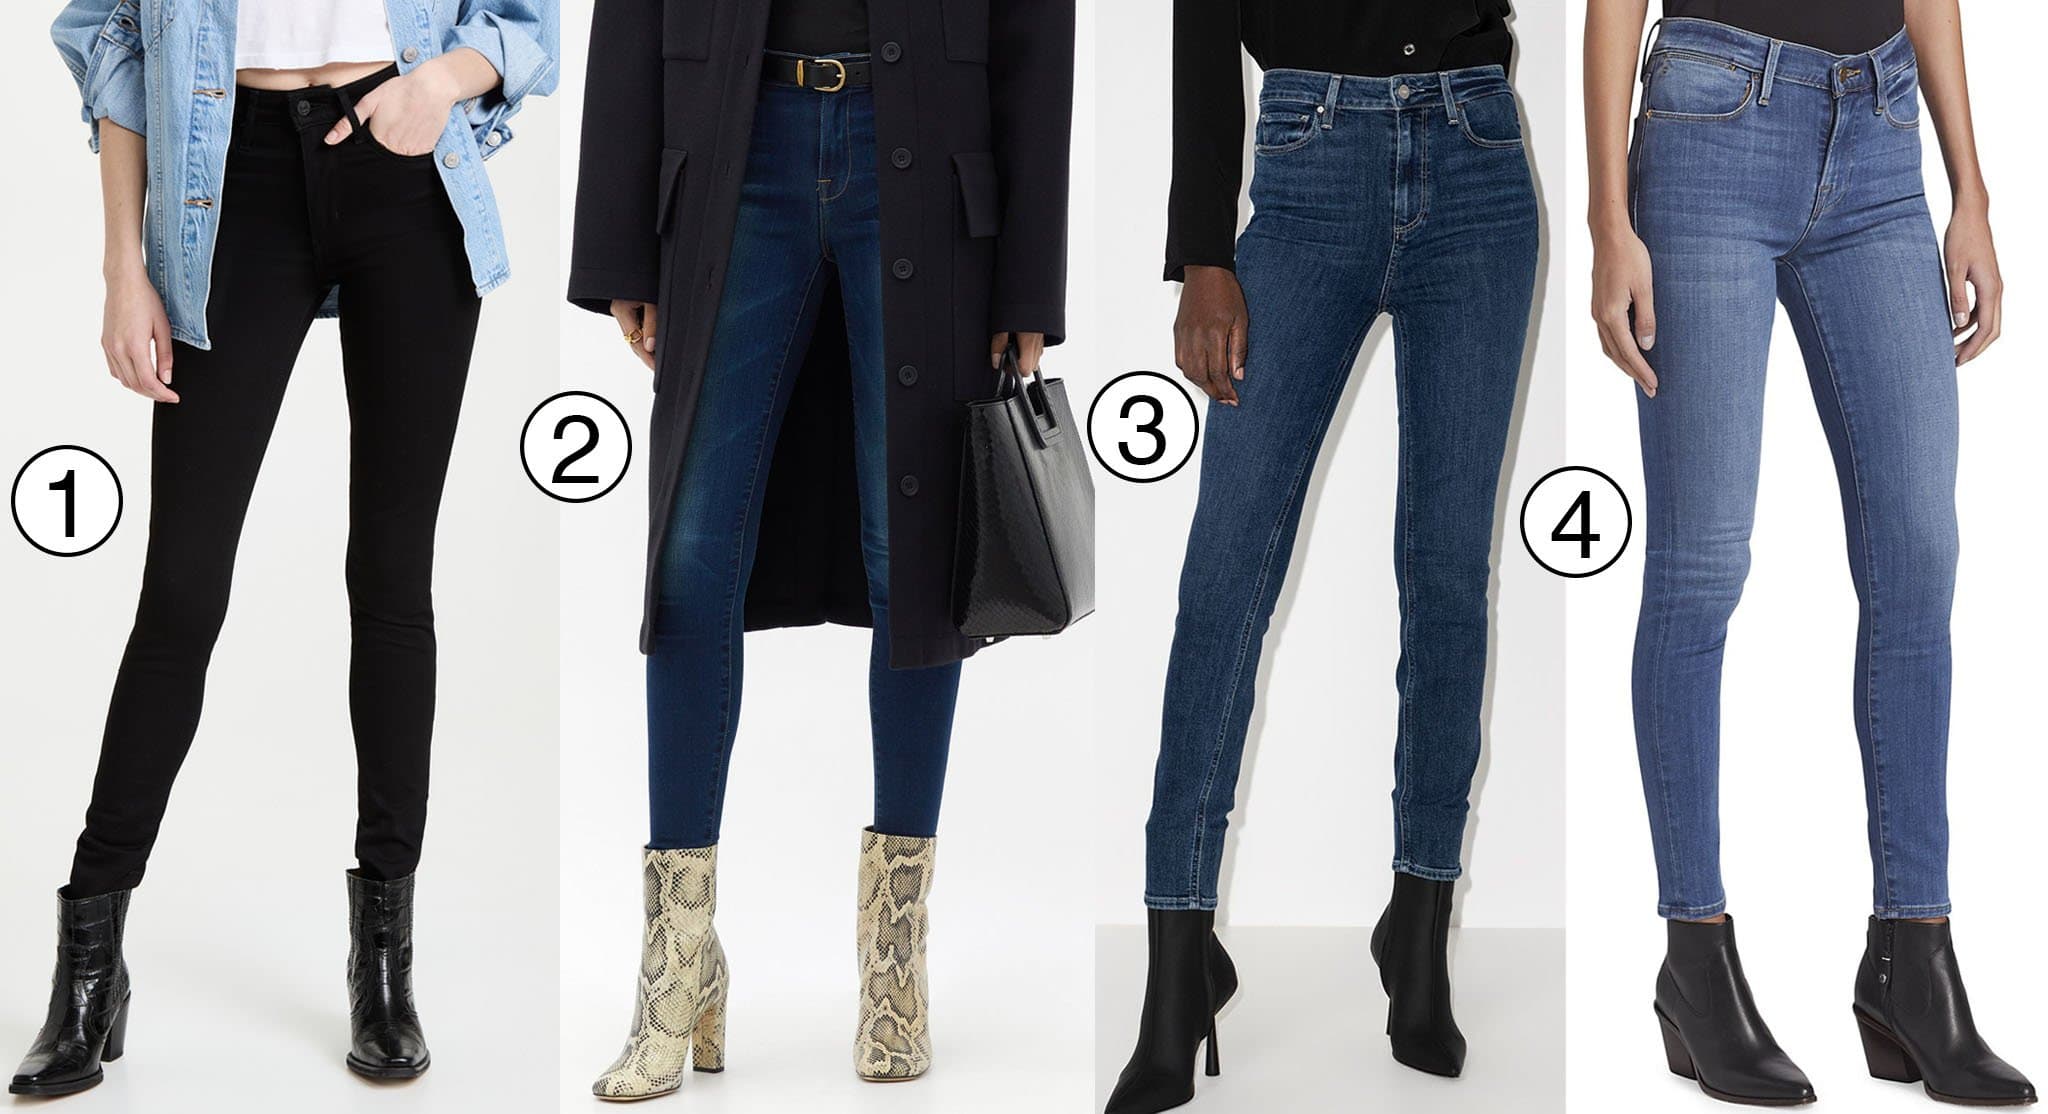 1. Levi's High Rise Skinny Jeans; 2. Frame Le High high-rise skinny-leg jeans; 3. Paige Margot cropped skinny jeans; 4. Frame Le High Skinny Jeans, $210 at Saks Fifth Avenue